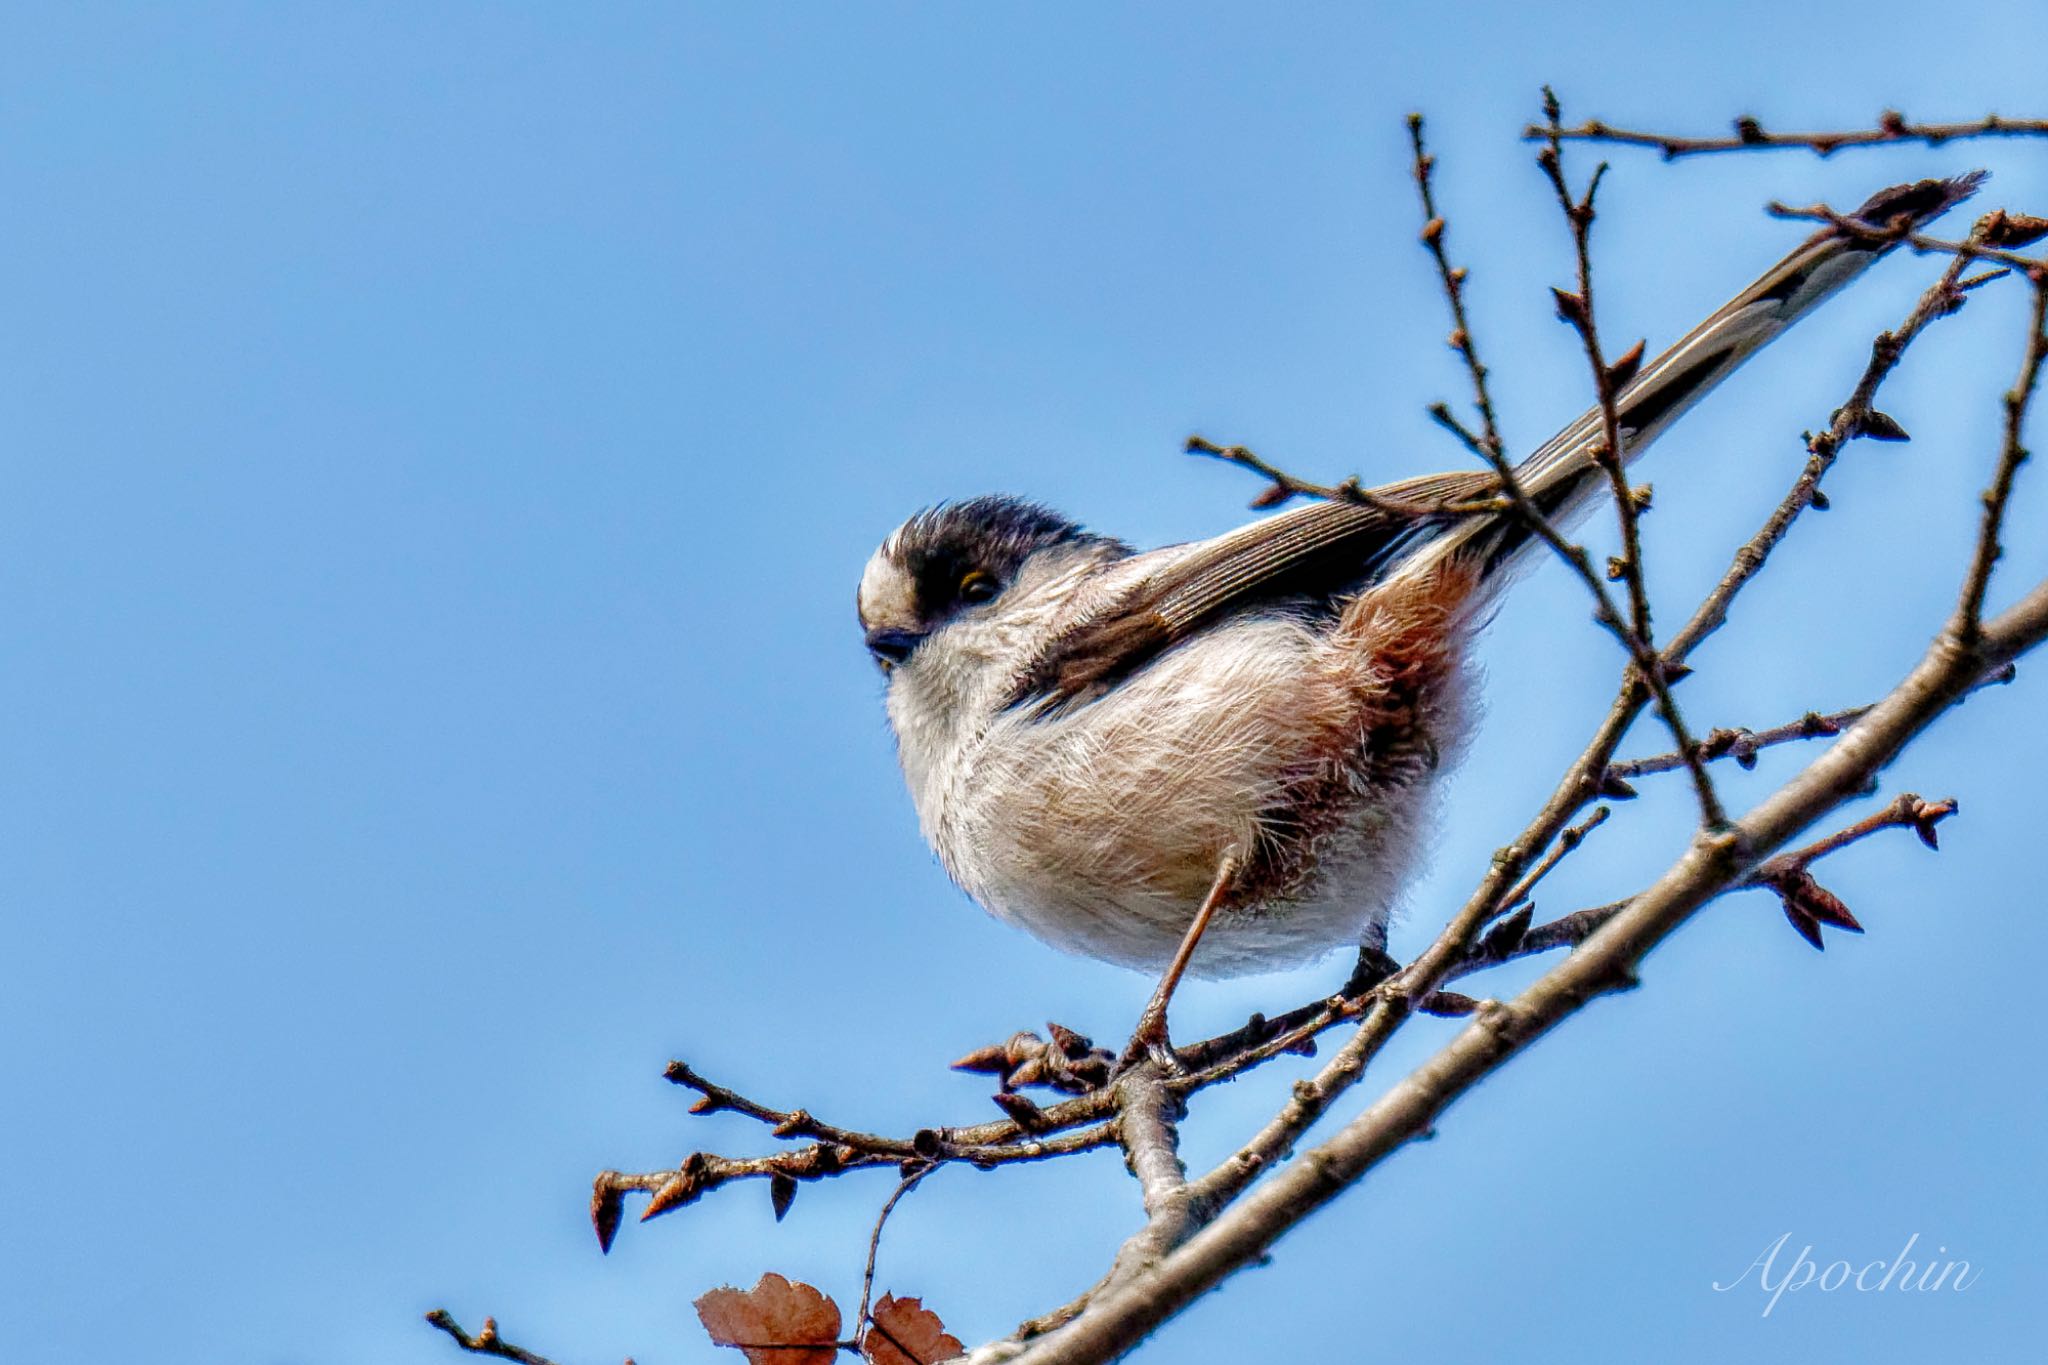 Photo of Long-tailed Tit at Showa Kinen Park by アポちん